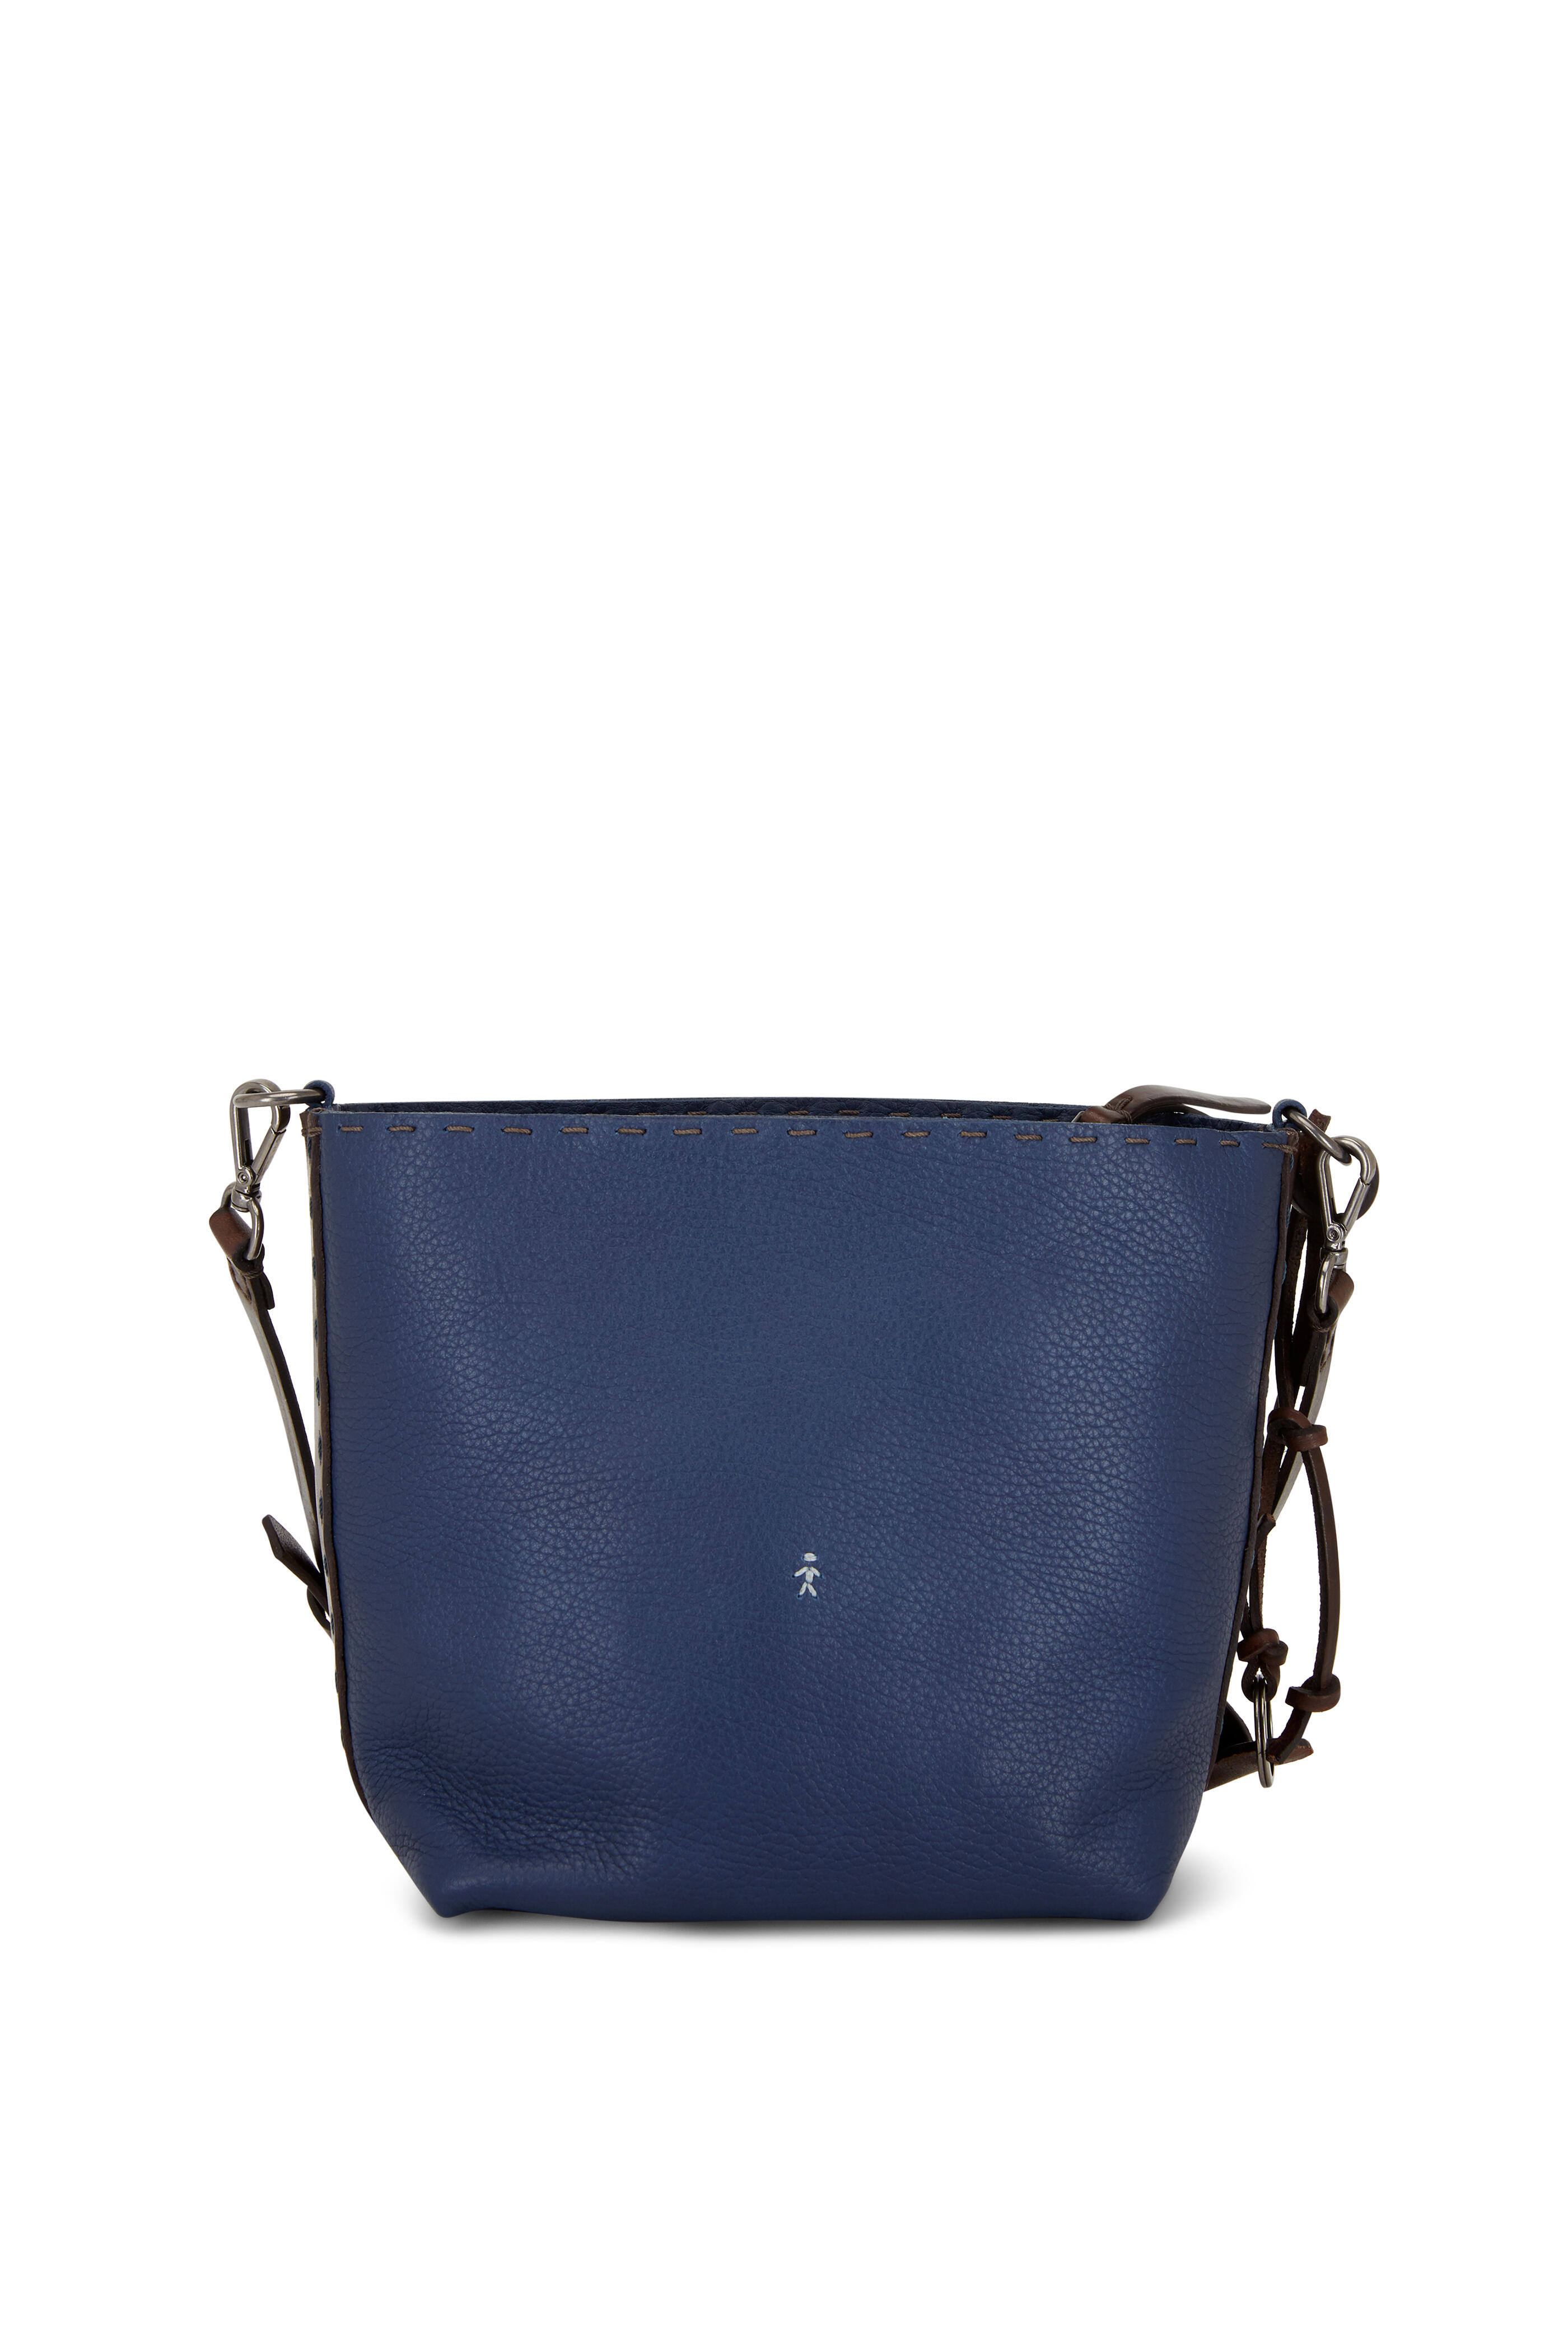 Henry Beguelin - Cuoio Margherita Navy Leather Crossbody